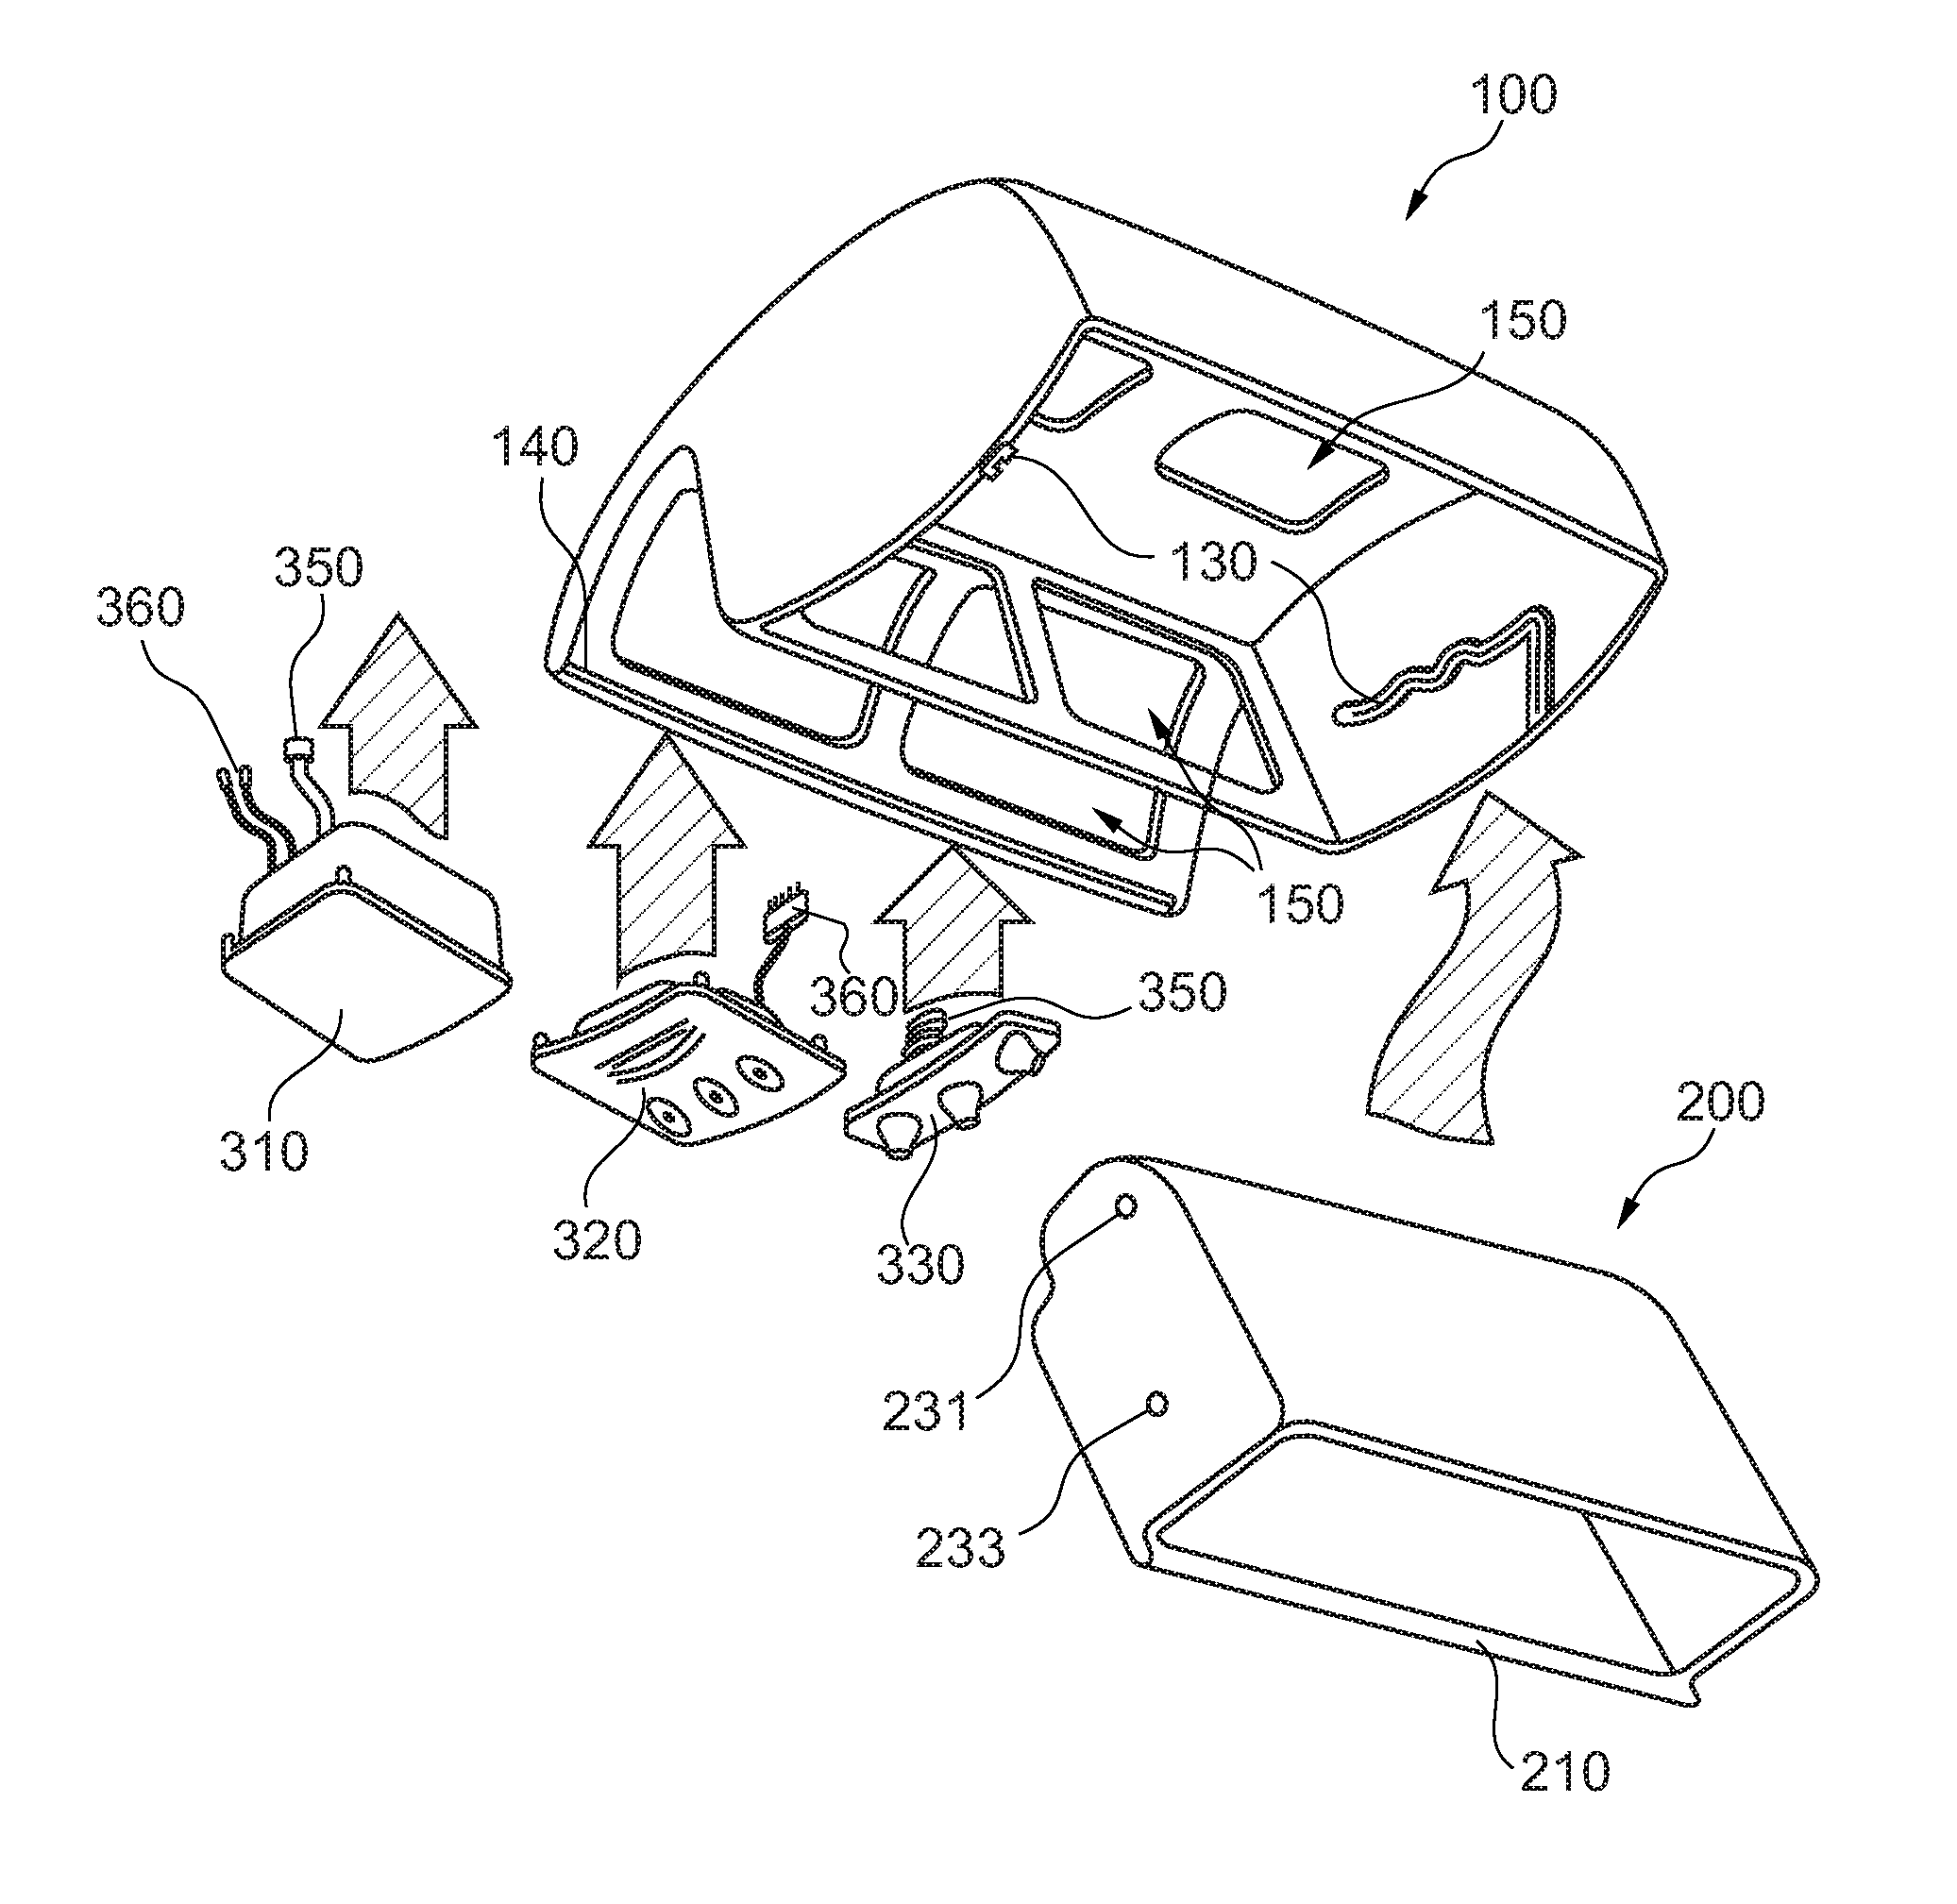 Storage compartment module with mobile storage compartment